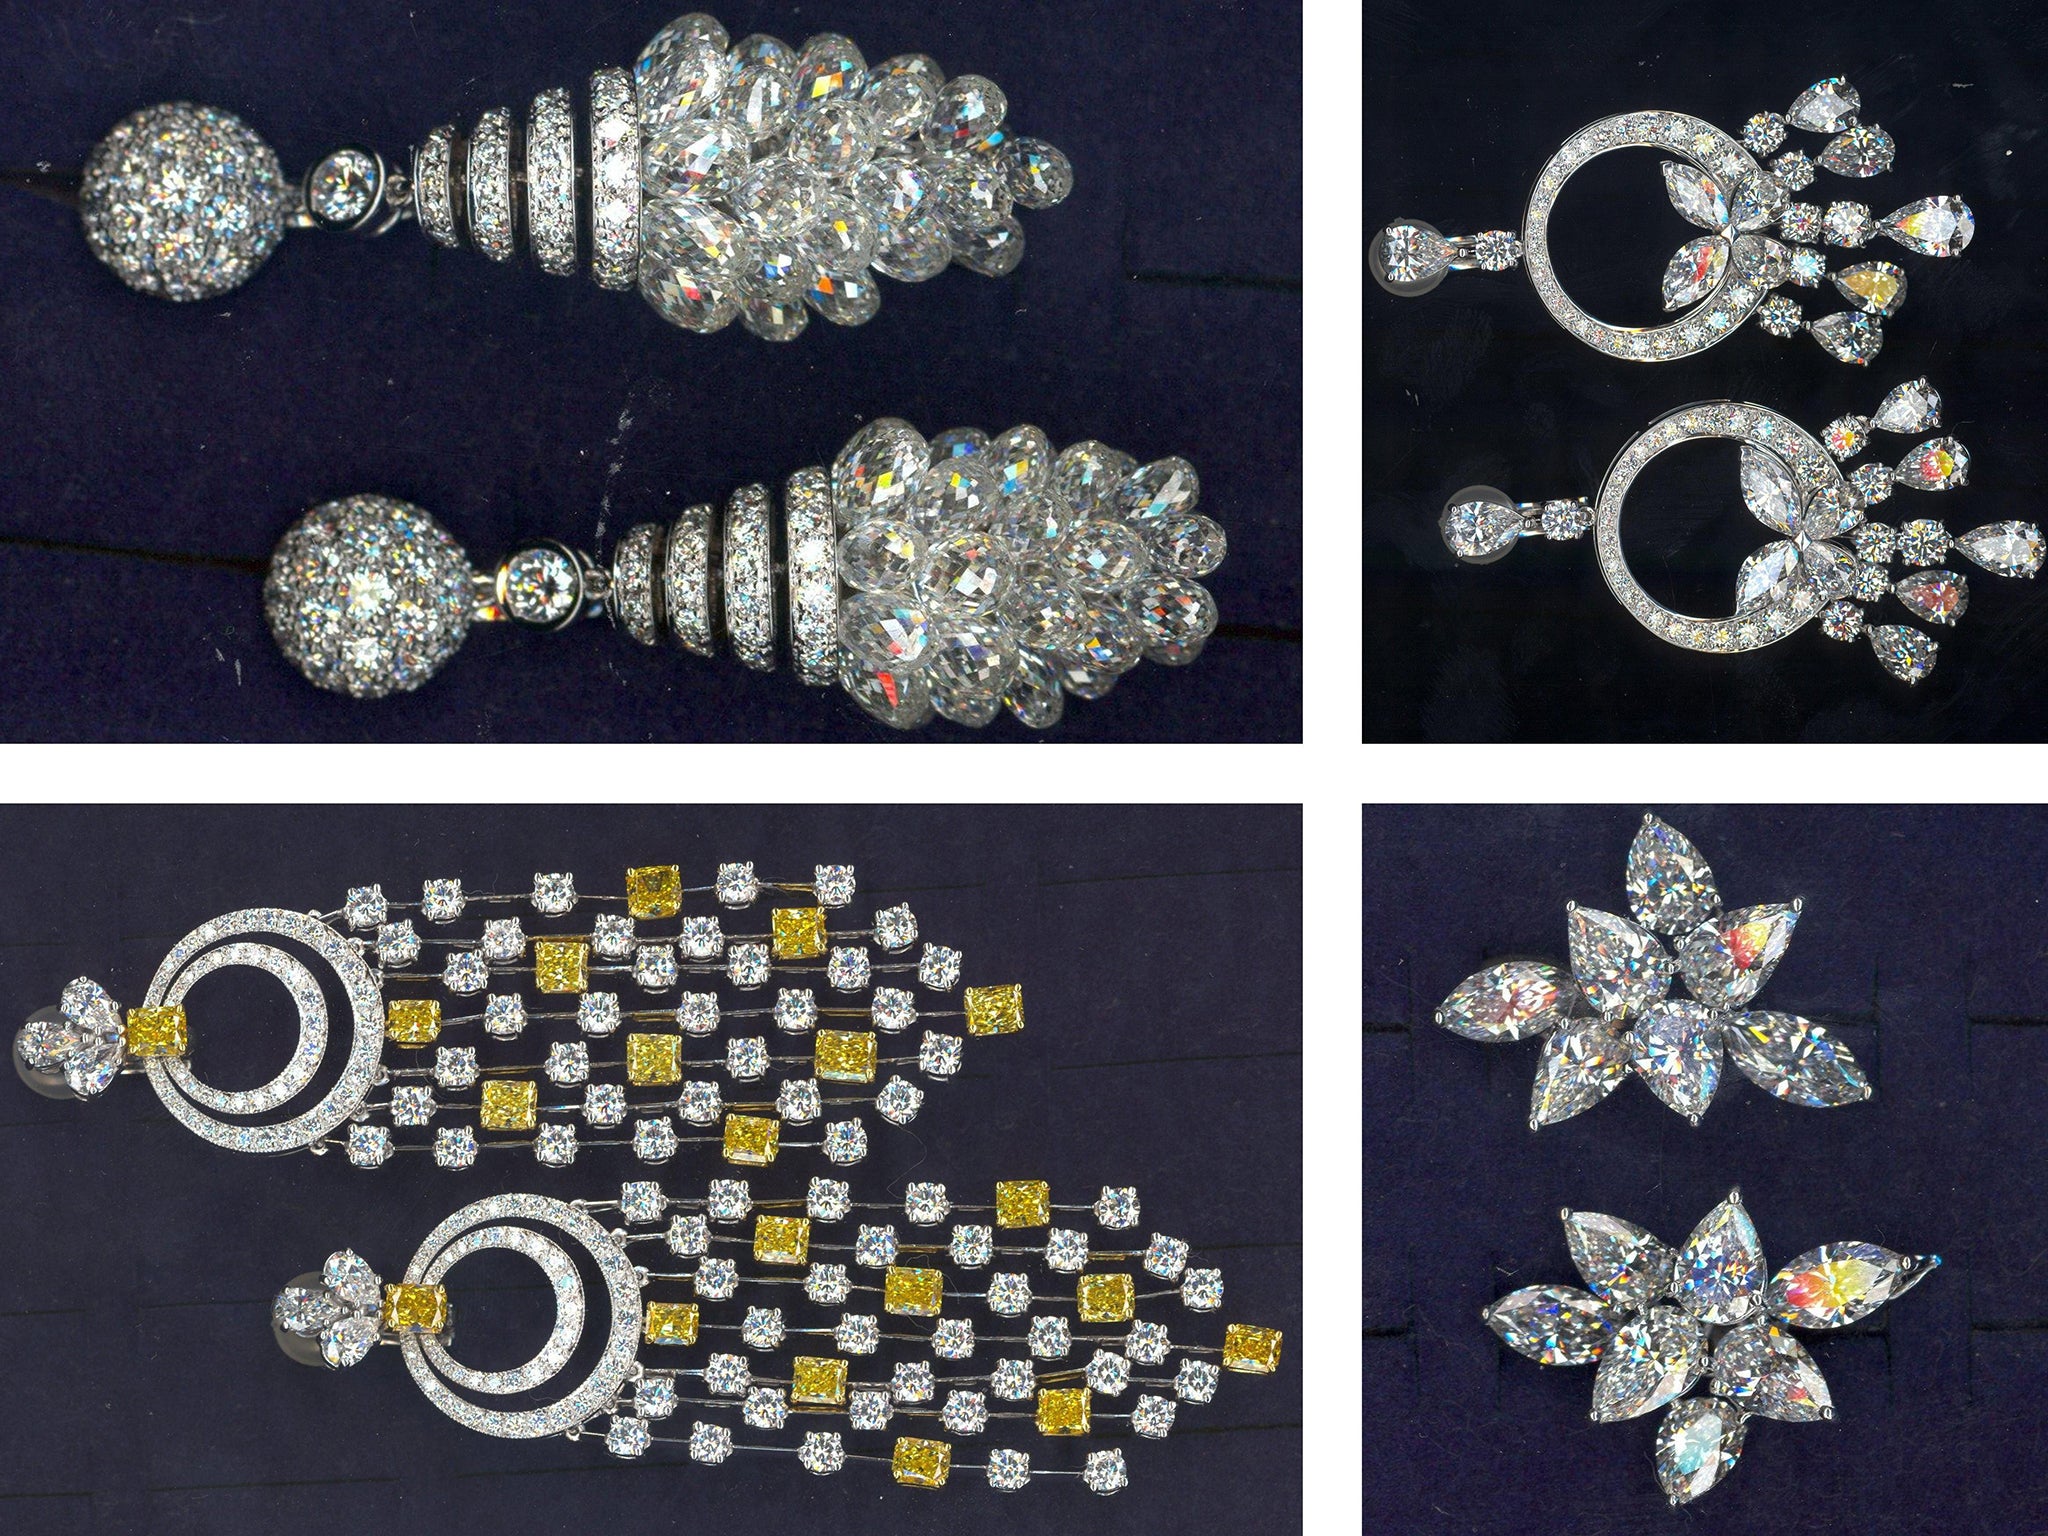 Some of the items of jewellery stolen from Graff Diamonds